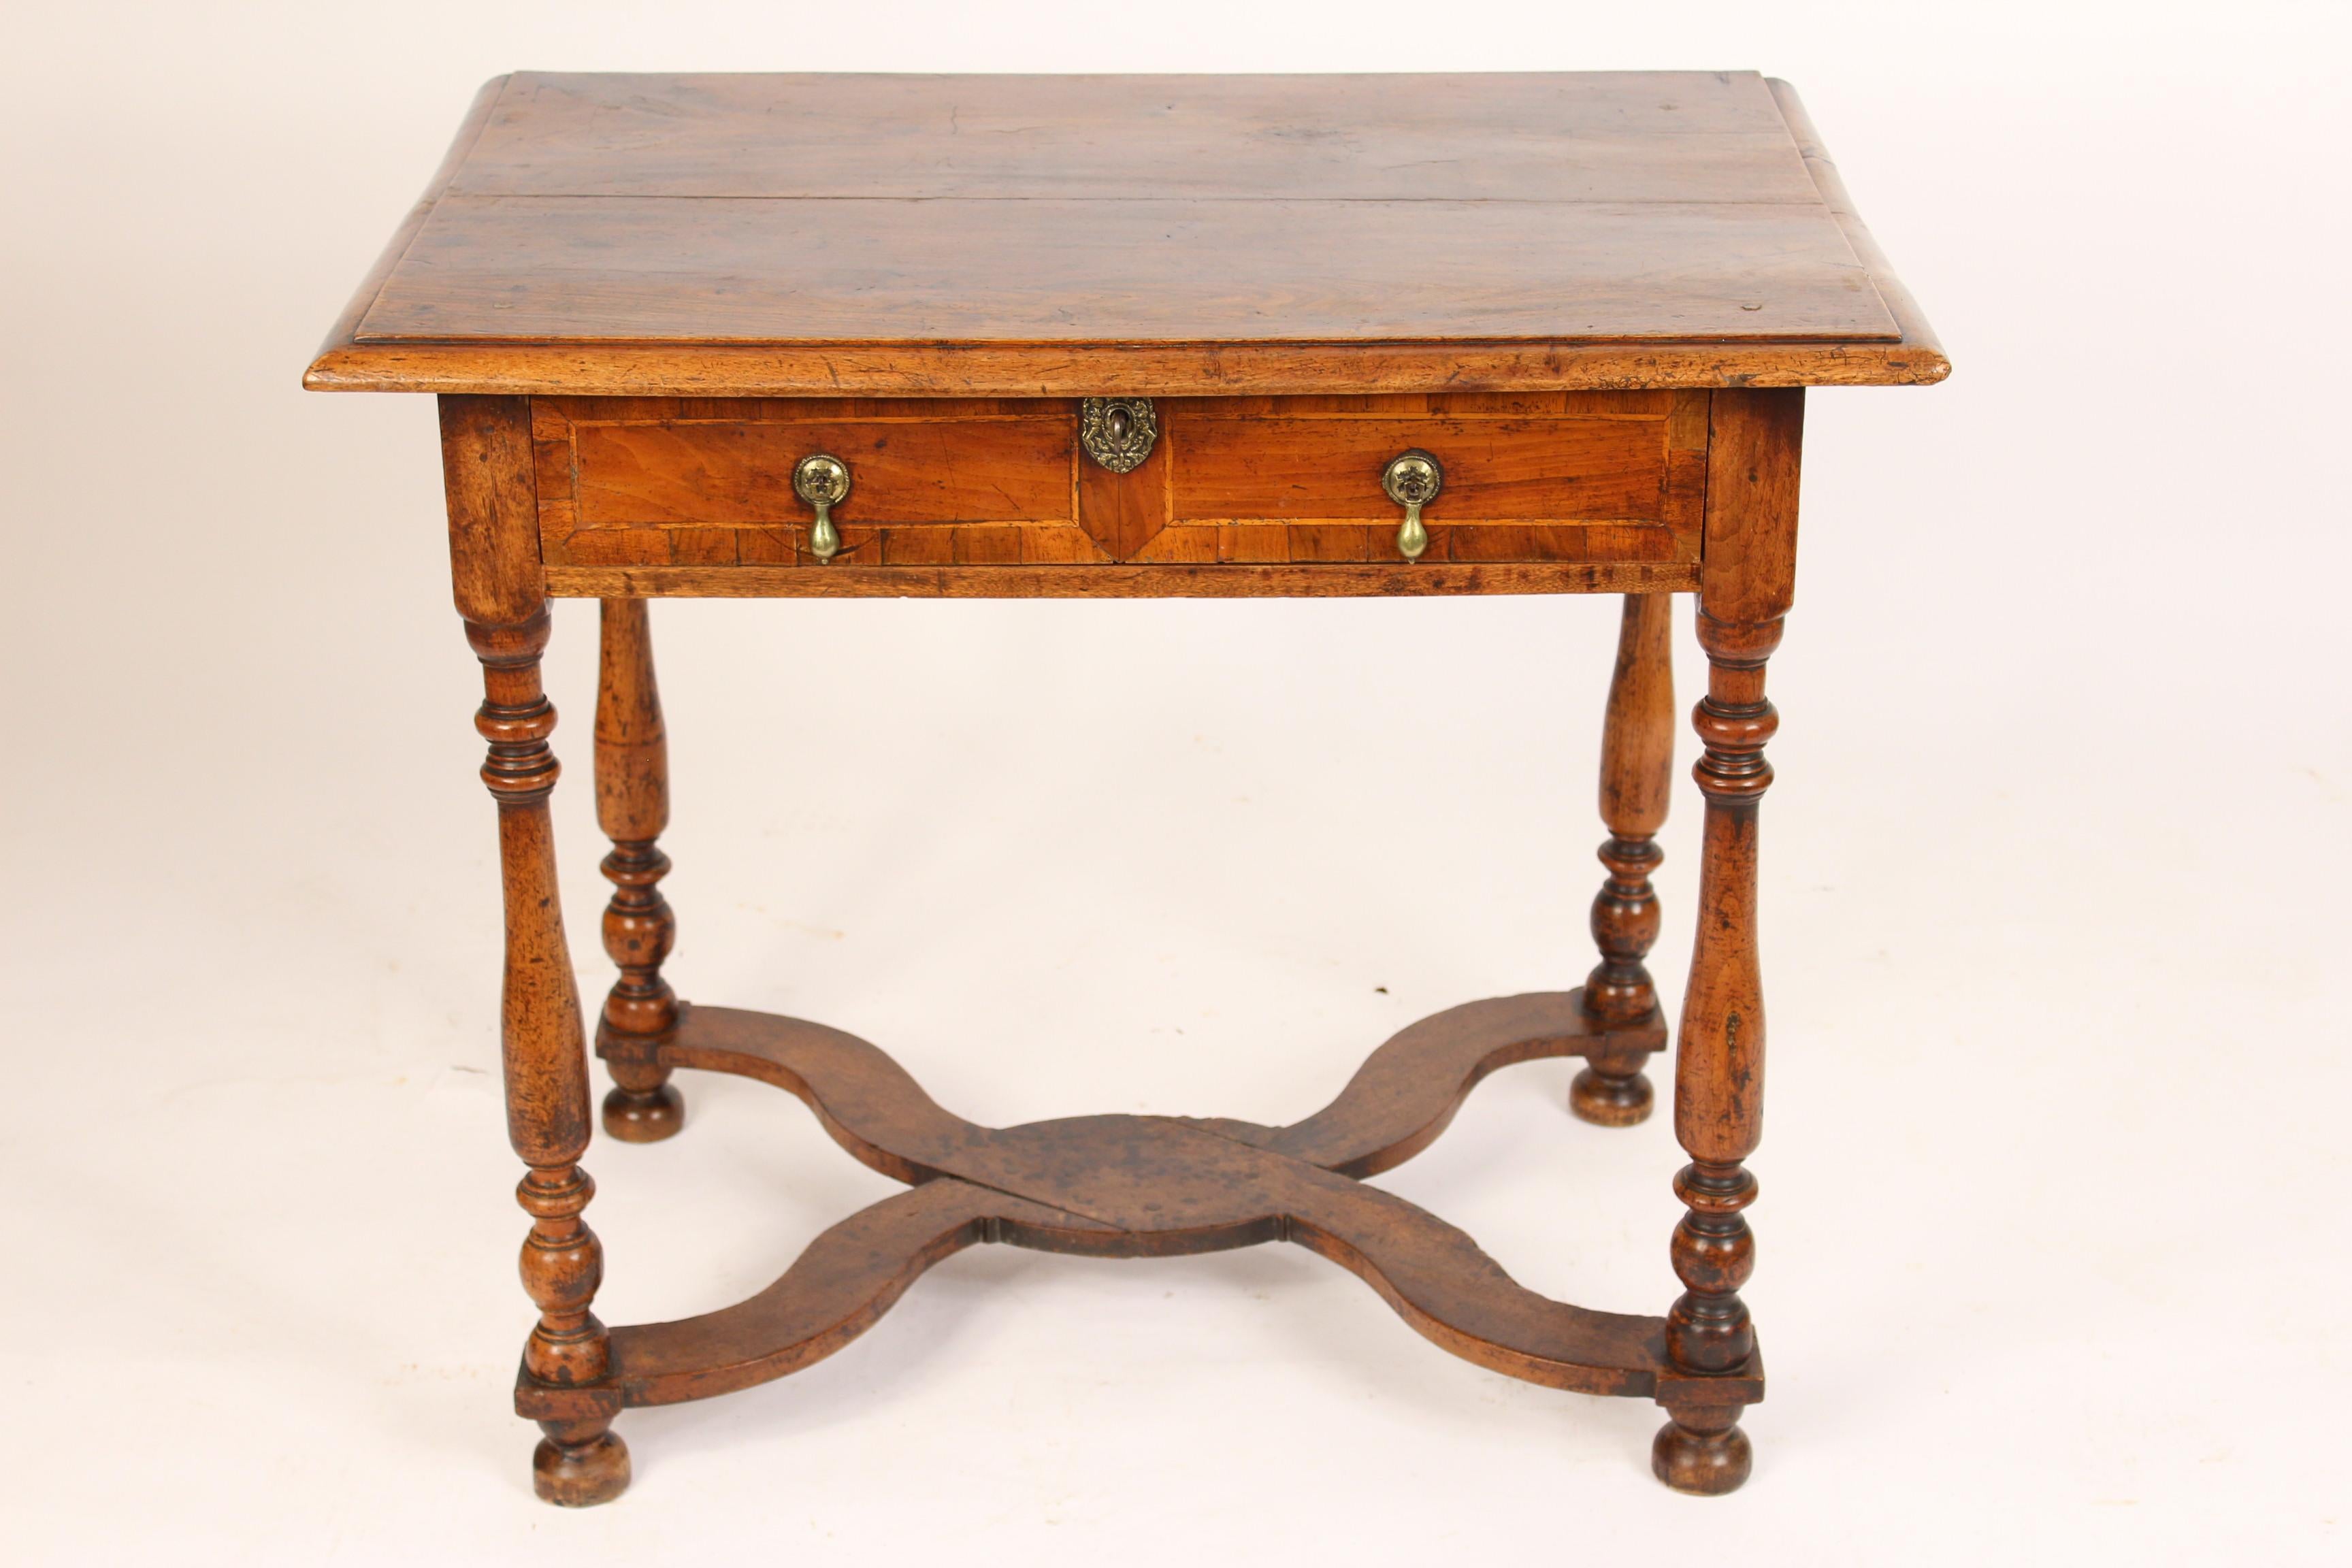 Antique Louis XIV style walnut occasional table, 19th century. With a partial grain painted top and X shaped stretcher bar. This table has an excellent old patina.